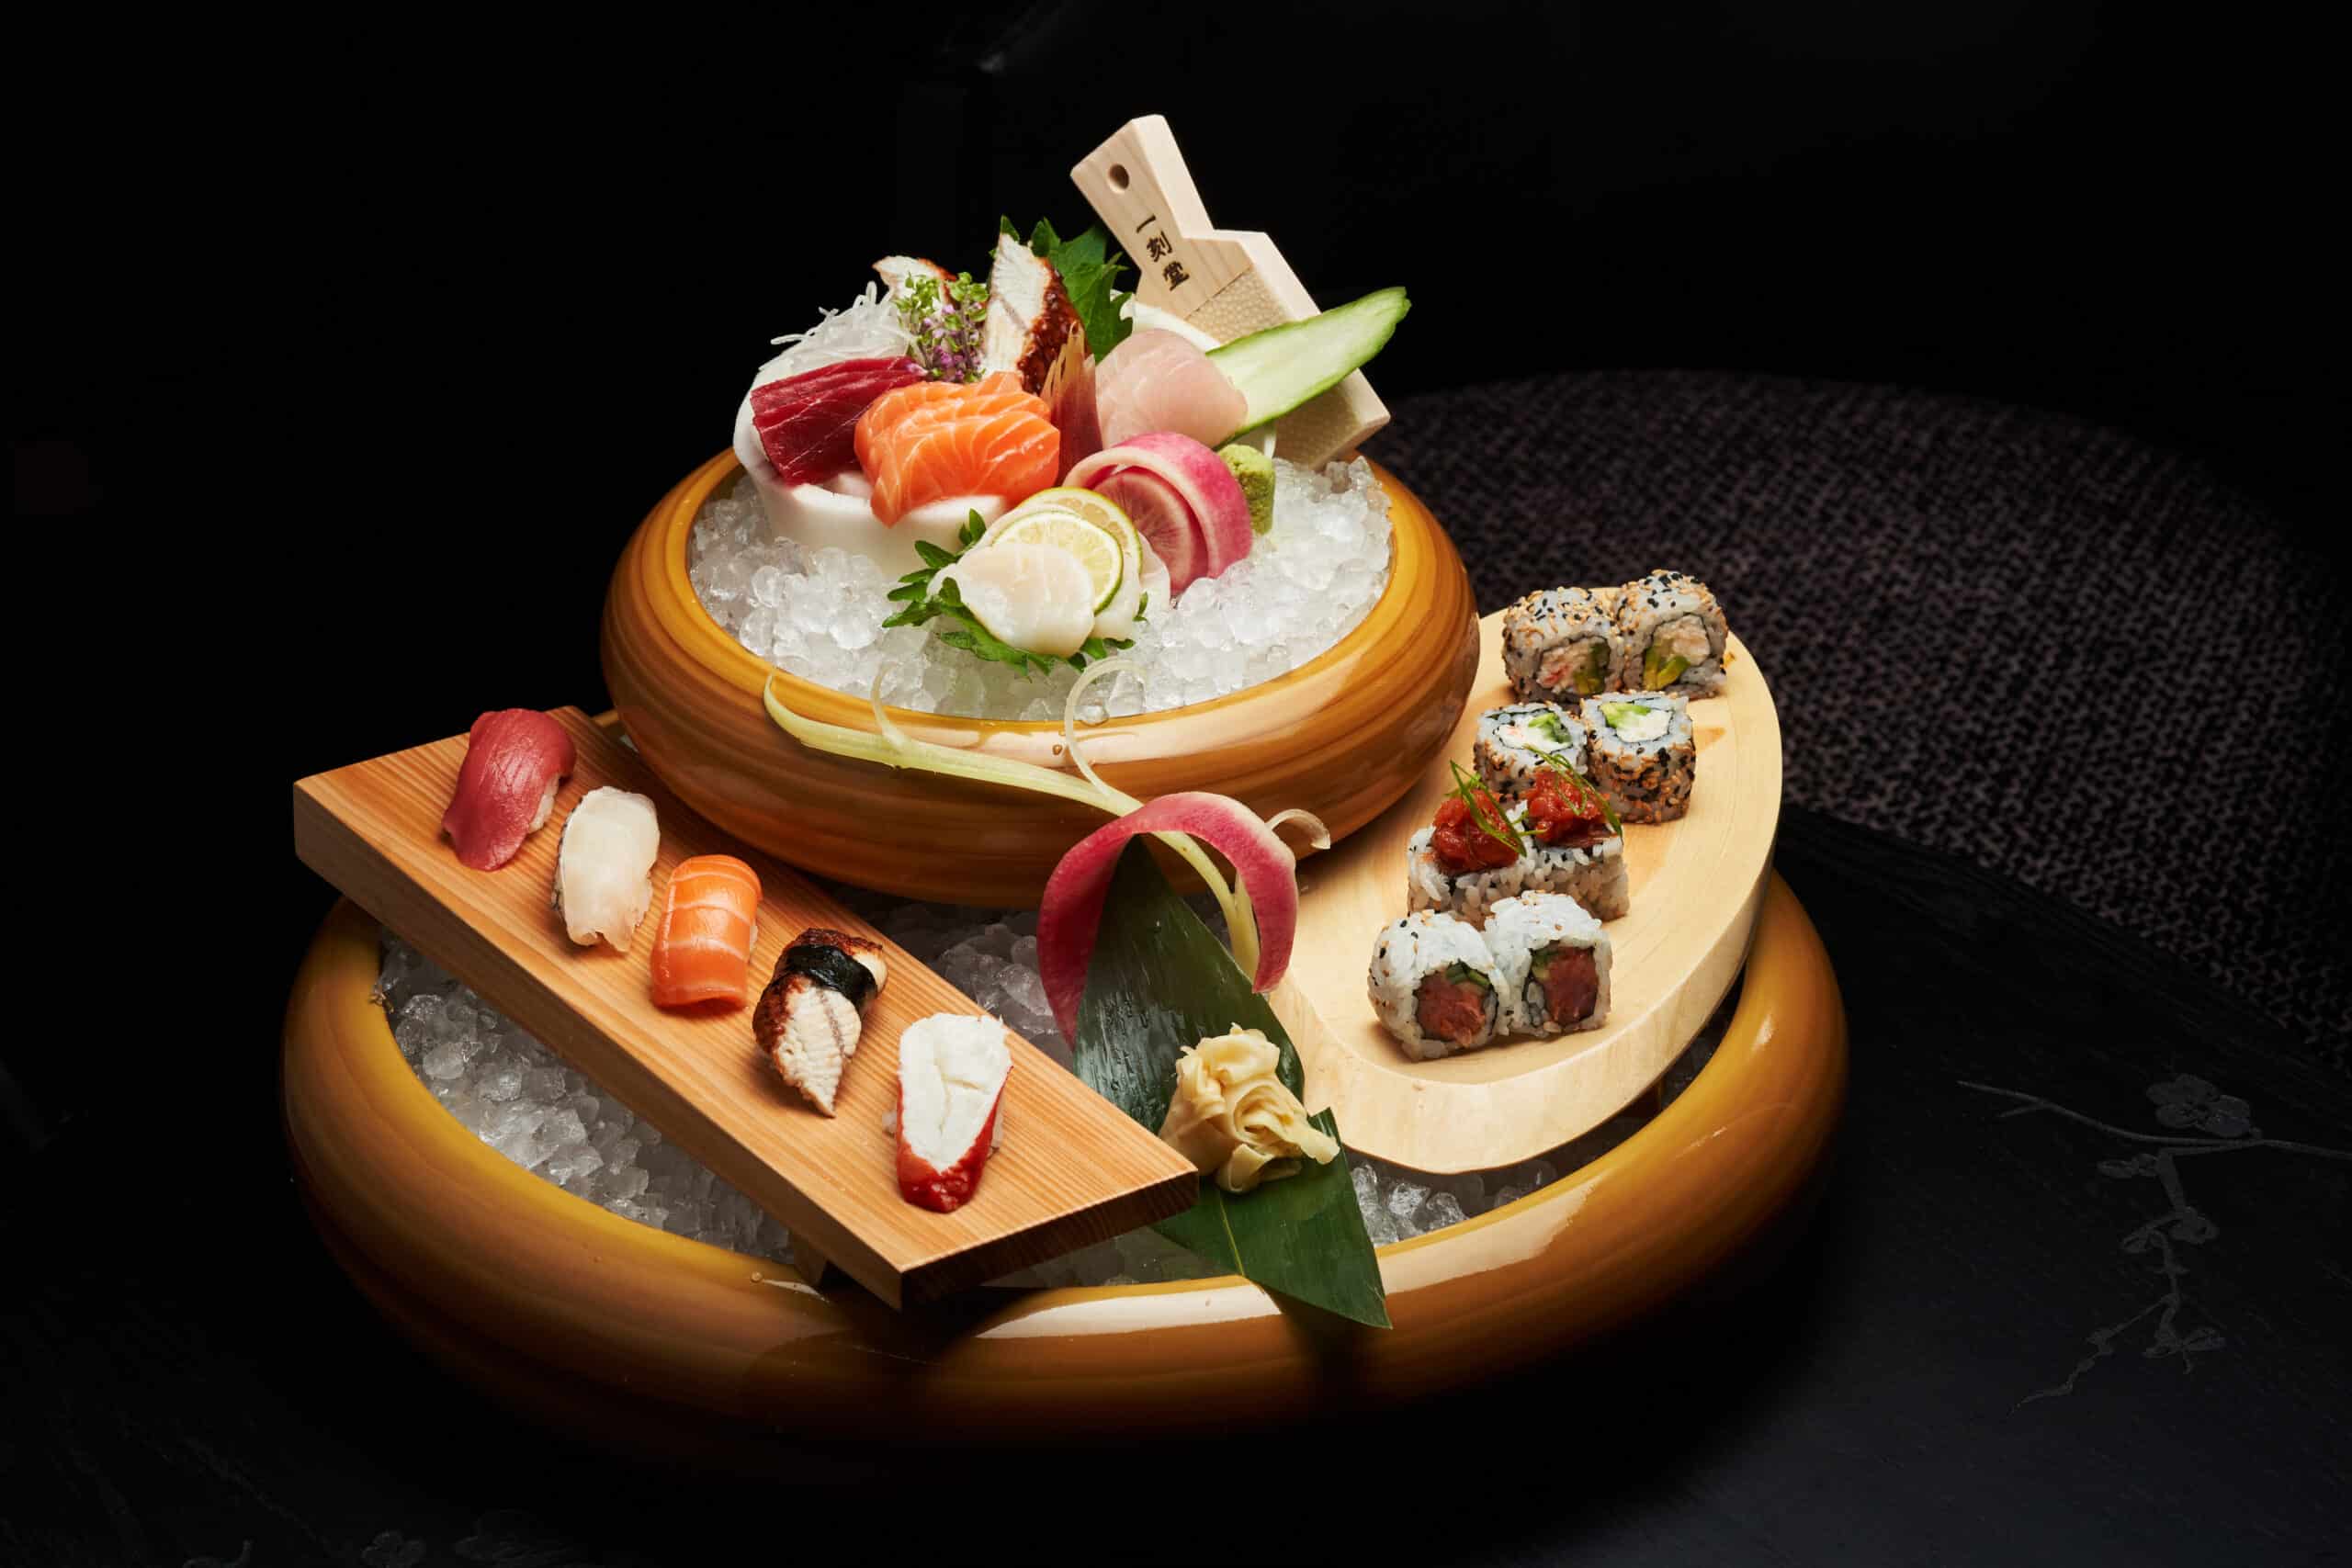 An exquisite Omakase Dining experience awaits your discovery